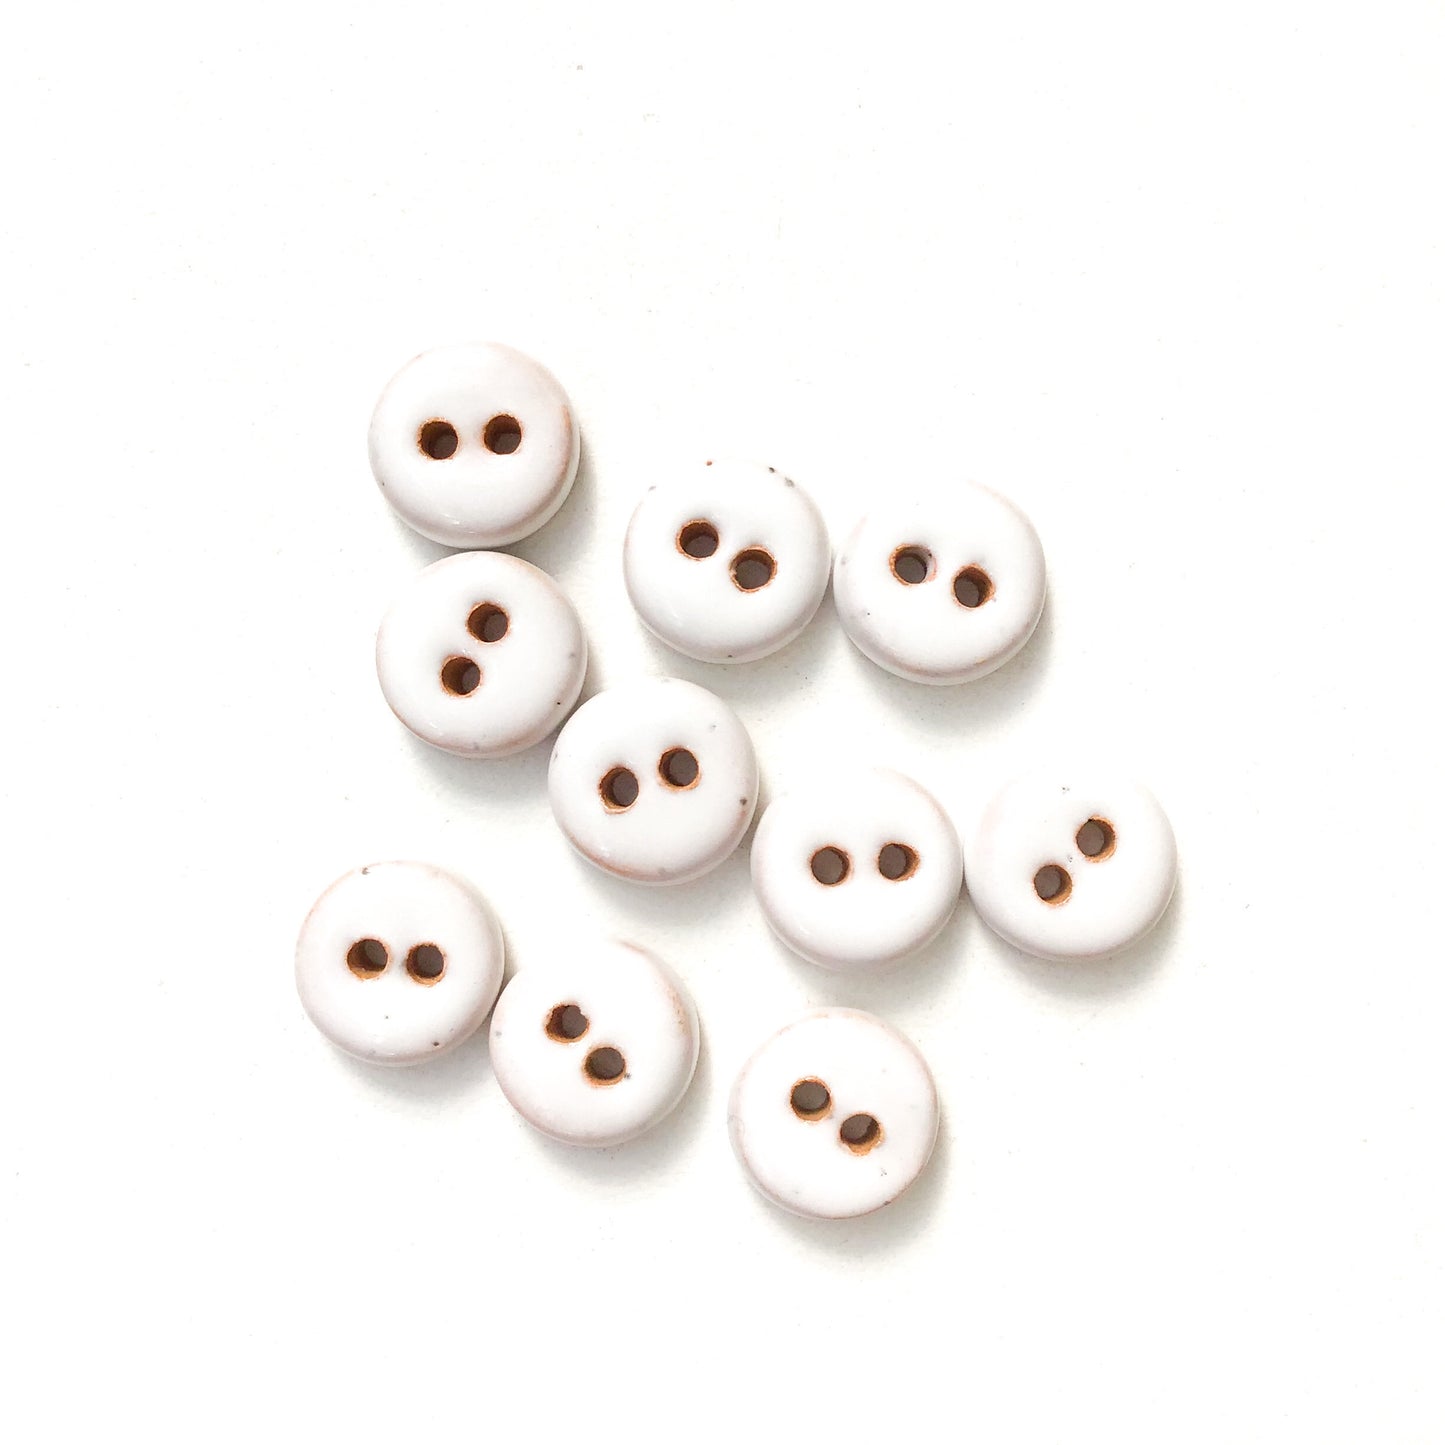 White Ceramic Buttons - Hand Made Clay Buttons - 7/16" - 10 Pack (ws-263)